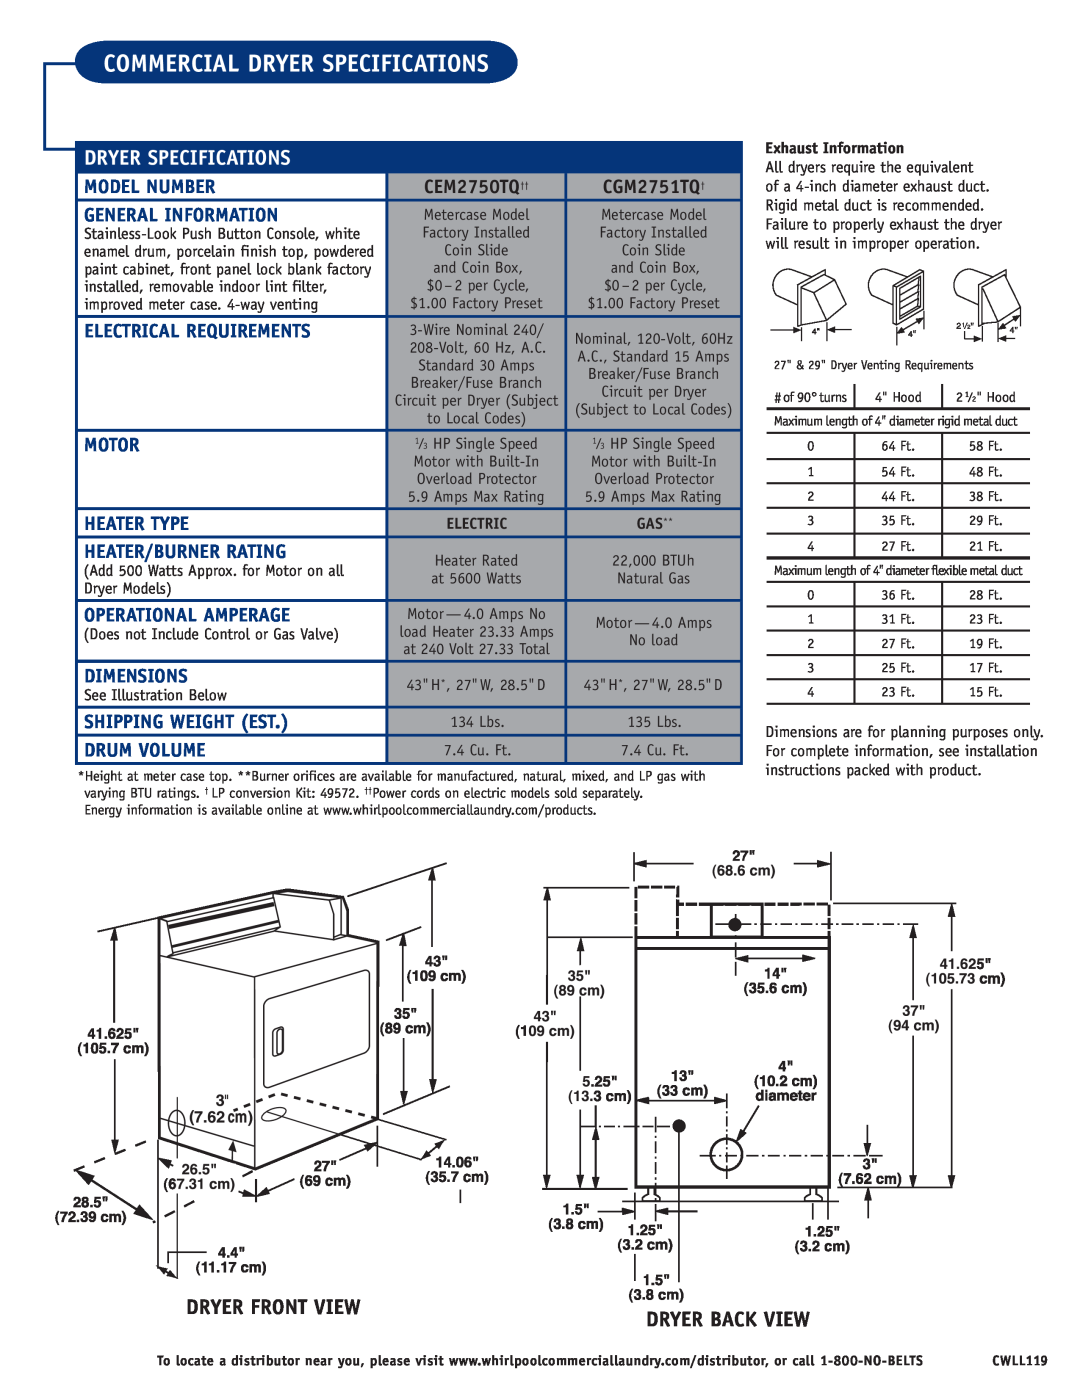 Whirlpool CEM2750TQ, CGM2751TQ warranty Commercial Dryer Specifications, Dryer Front View 